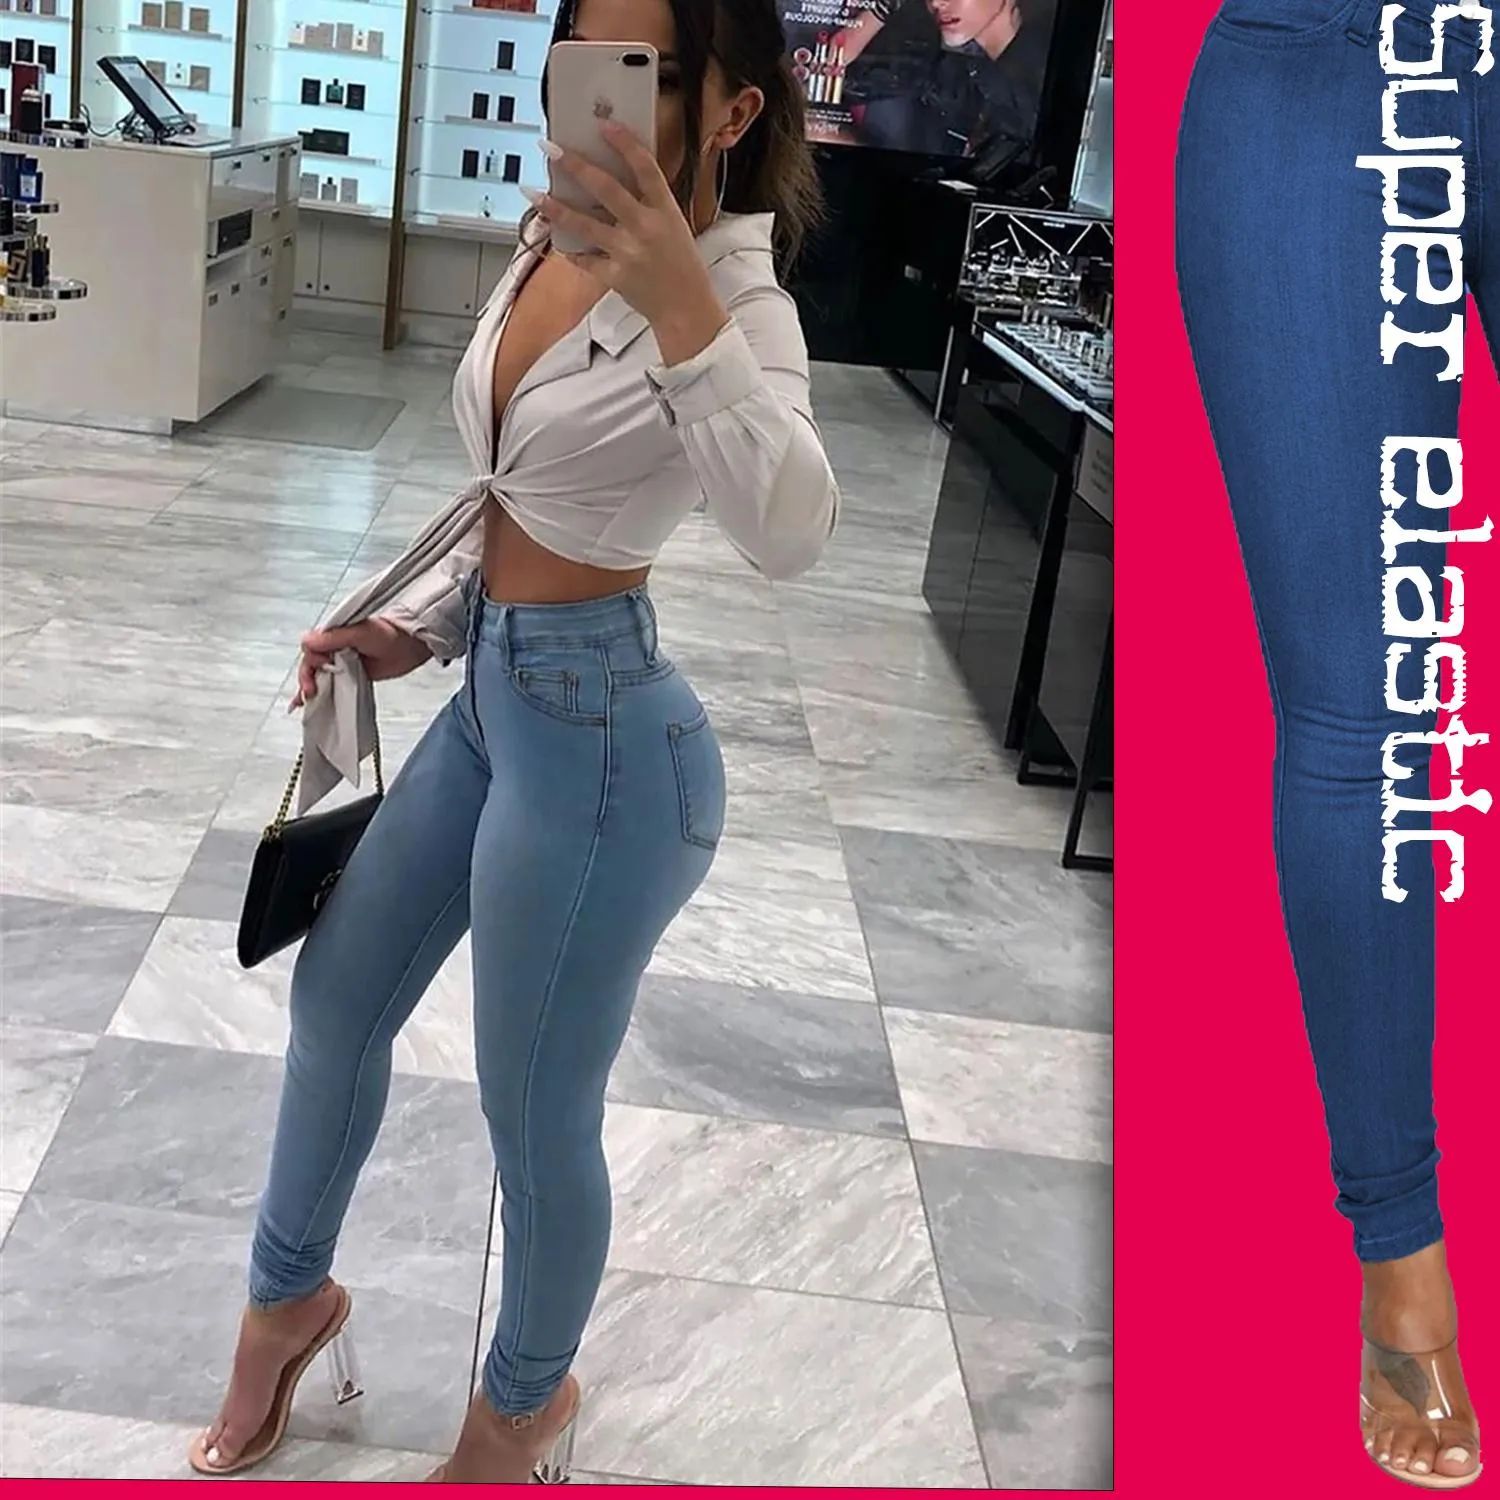 Jeans Push Up Women's Skinny Sexy Pencil Pants Plus Size High Waisted Xs Slit Badfriend Jeans Casual Clothes Large Hips Free Shipping